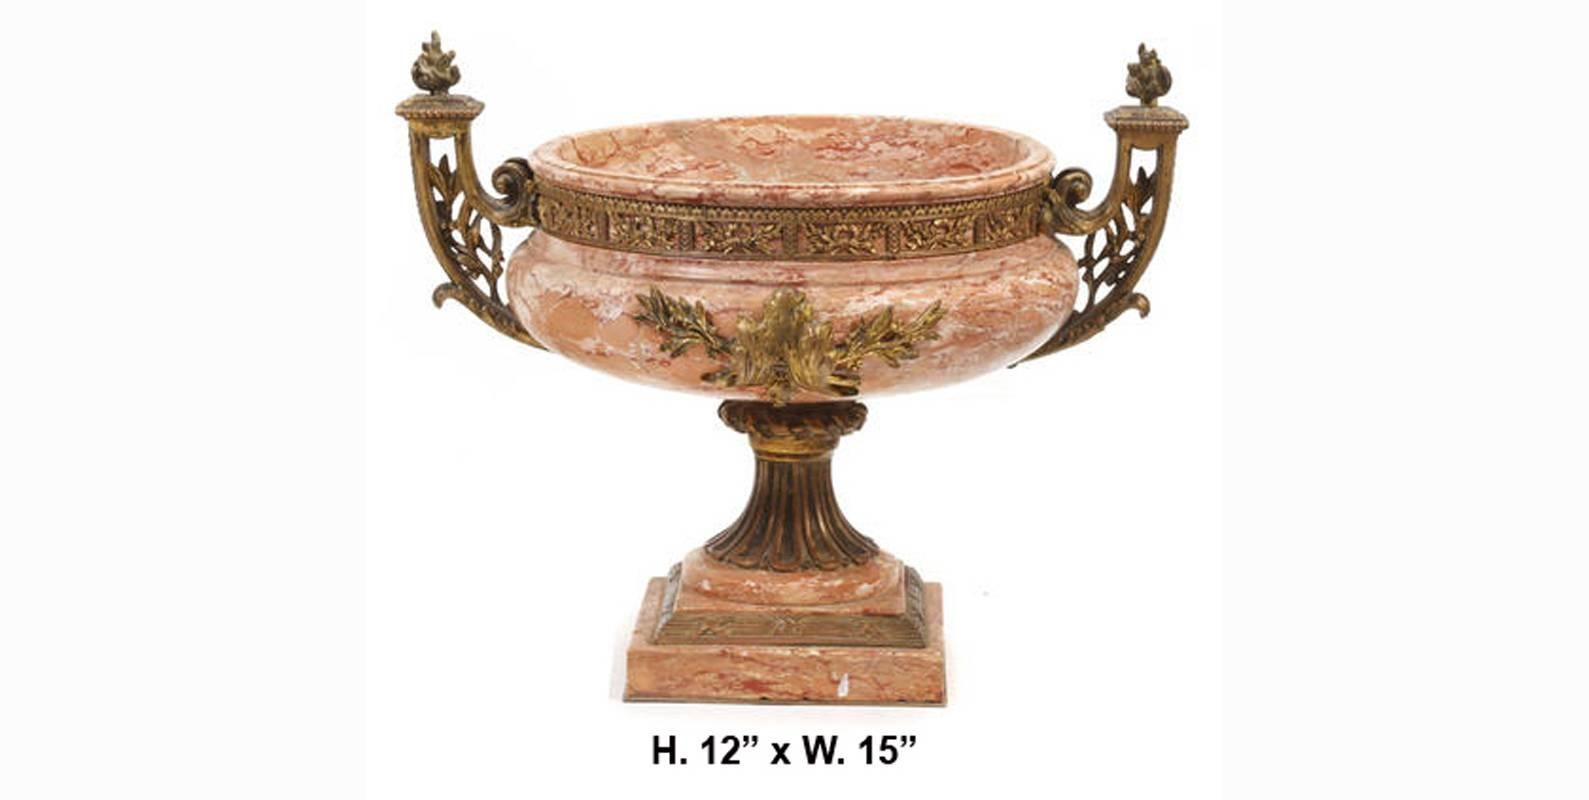 This beautiful, fine 19th century Italian neoclassical style gilt bronze mounted marble urn with intricate handles surmounted with a flame. The proportion is desirable and elegant.
The urn measurements is: Height 12 inches x Width: 15 inches x